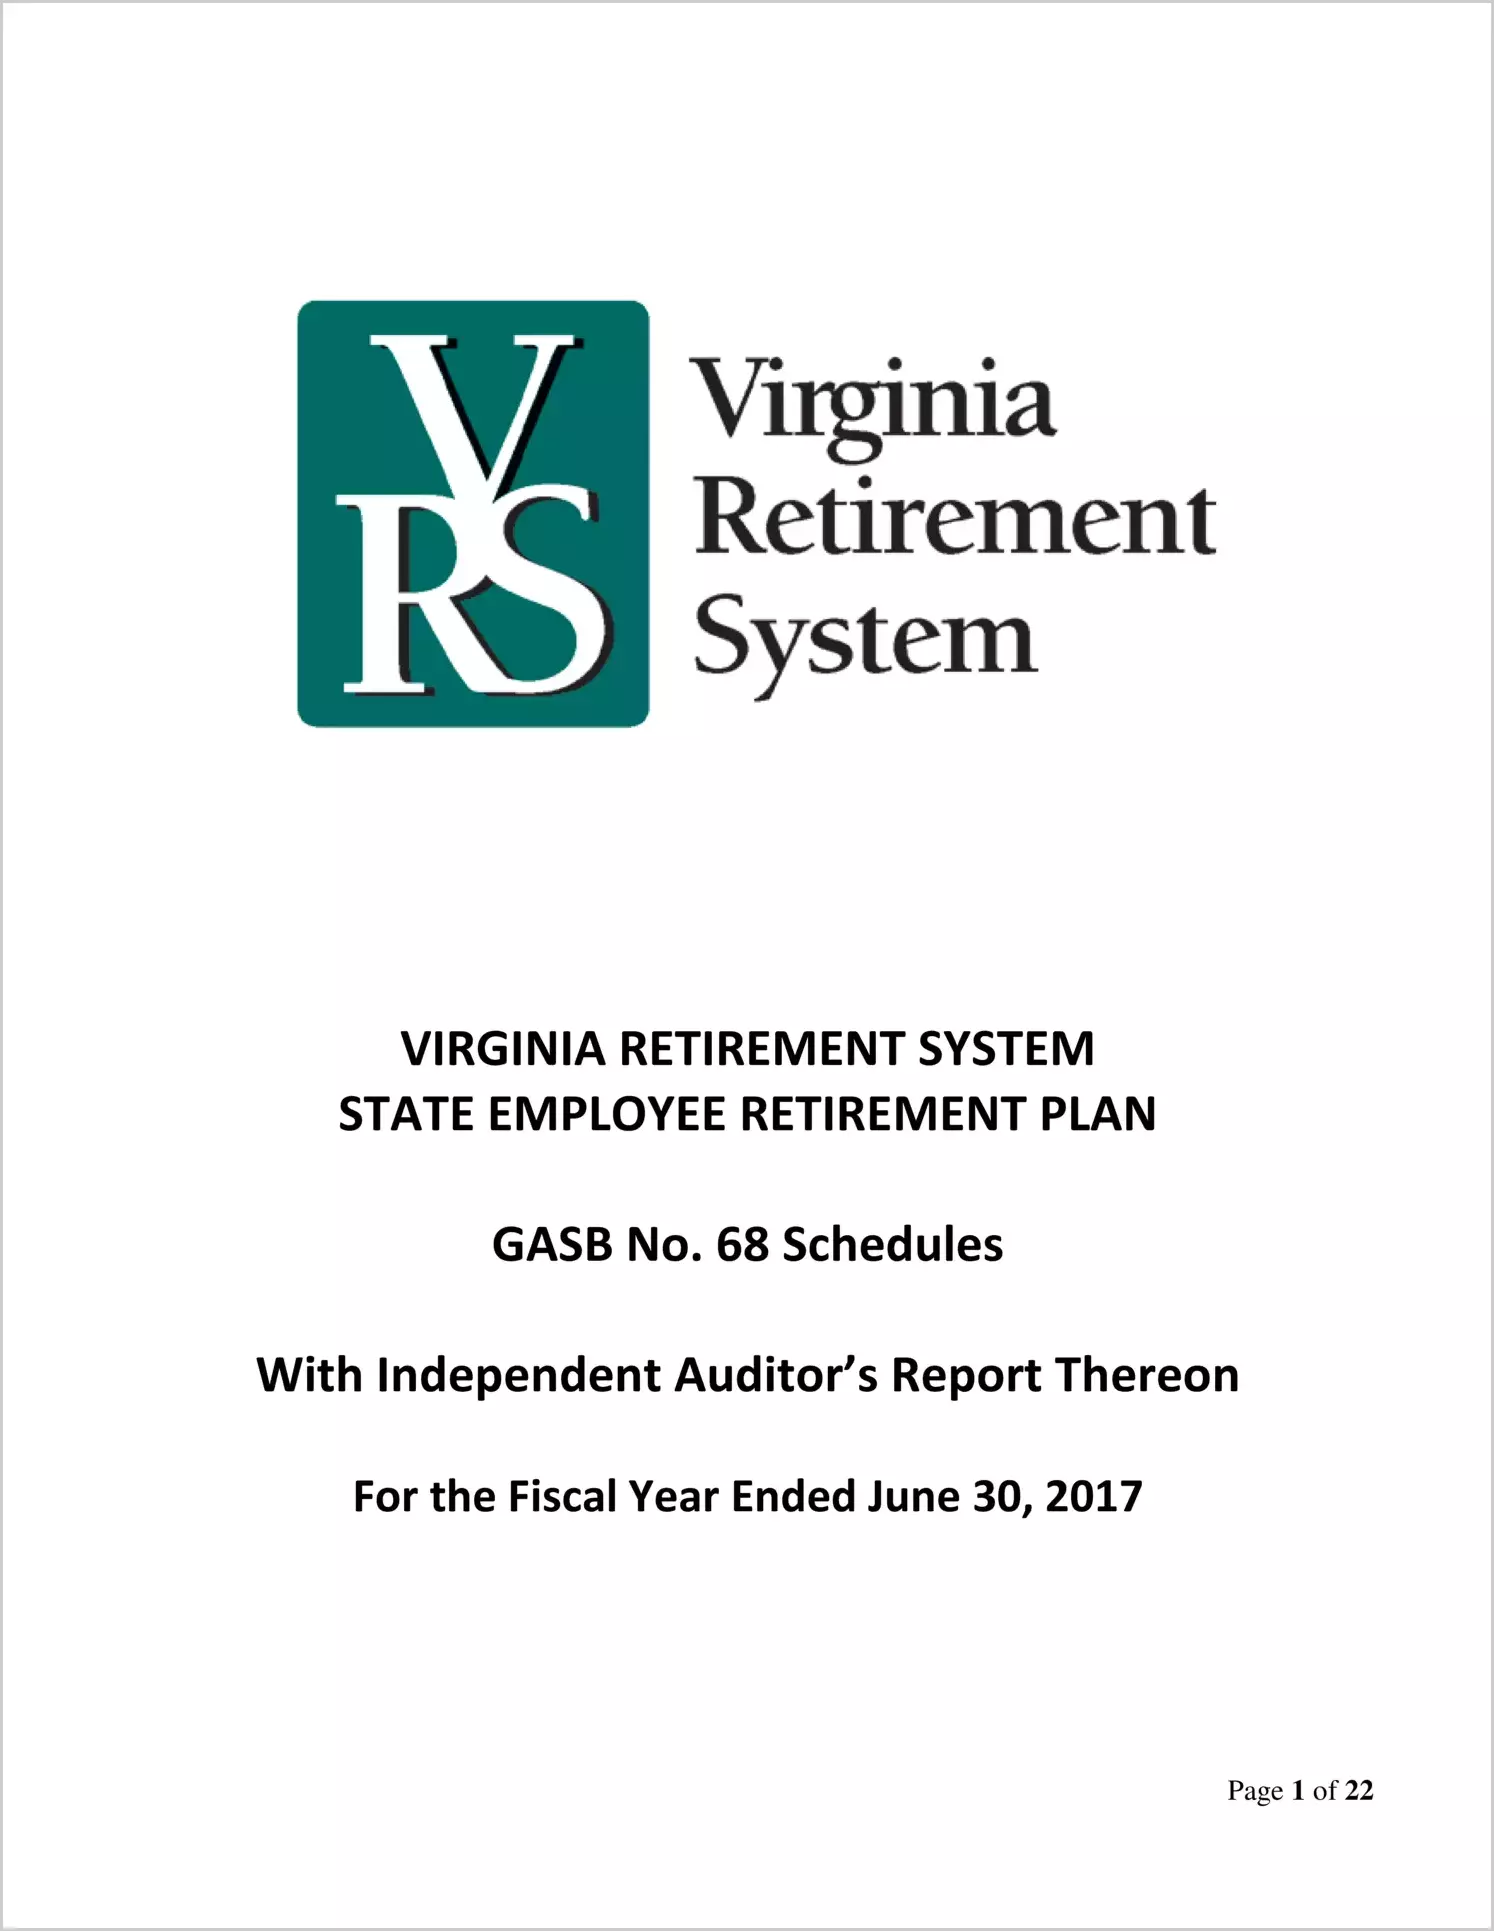 GASB 68 Schedule - State Employee Retirement Plan for fiscal year June 30, 2017